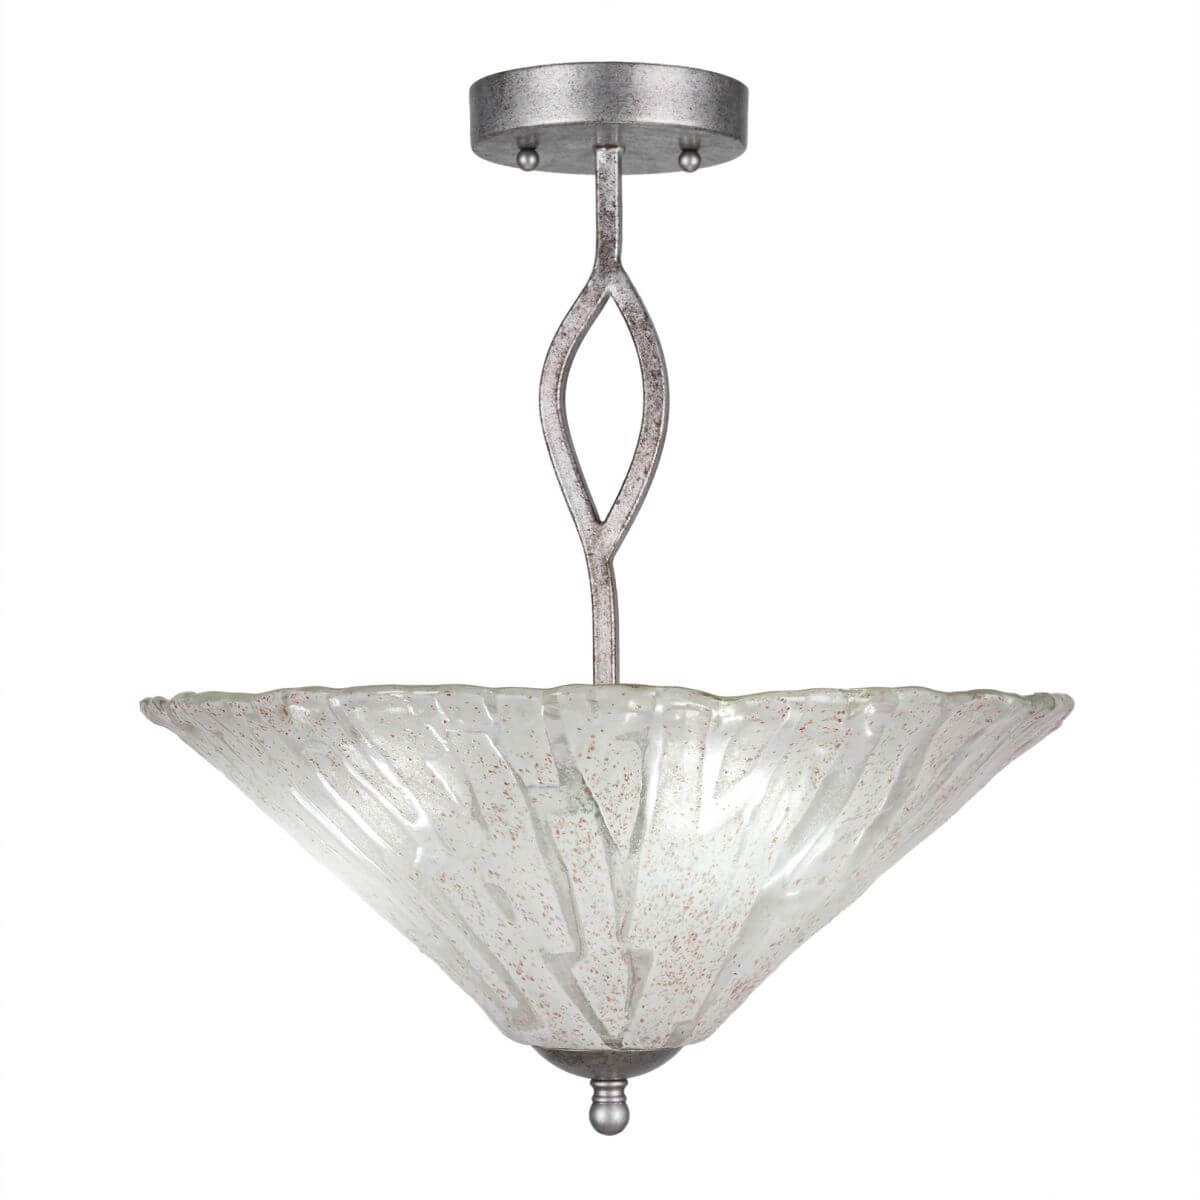 Toltec Lighting 242-AS-719 Revo 3 Light 16 inch Semi-Flush Mount in Aged Silver with 16 inch Italian Ice Glass